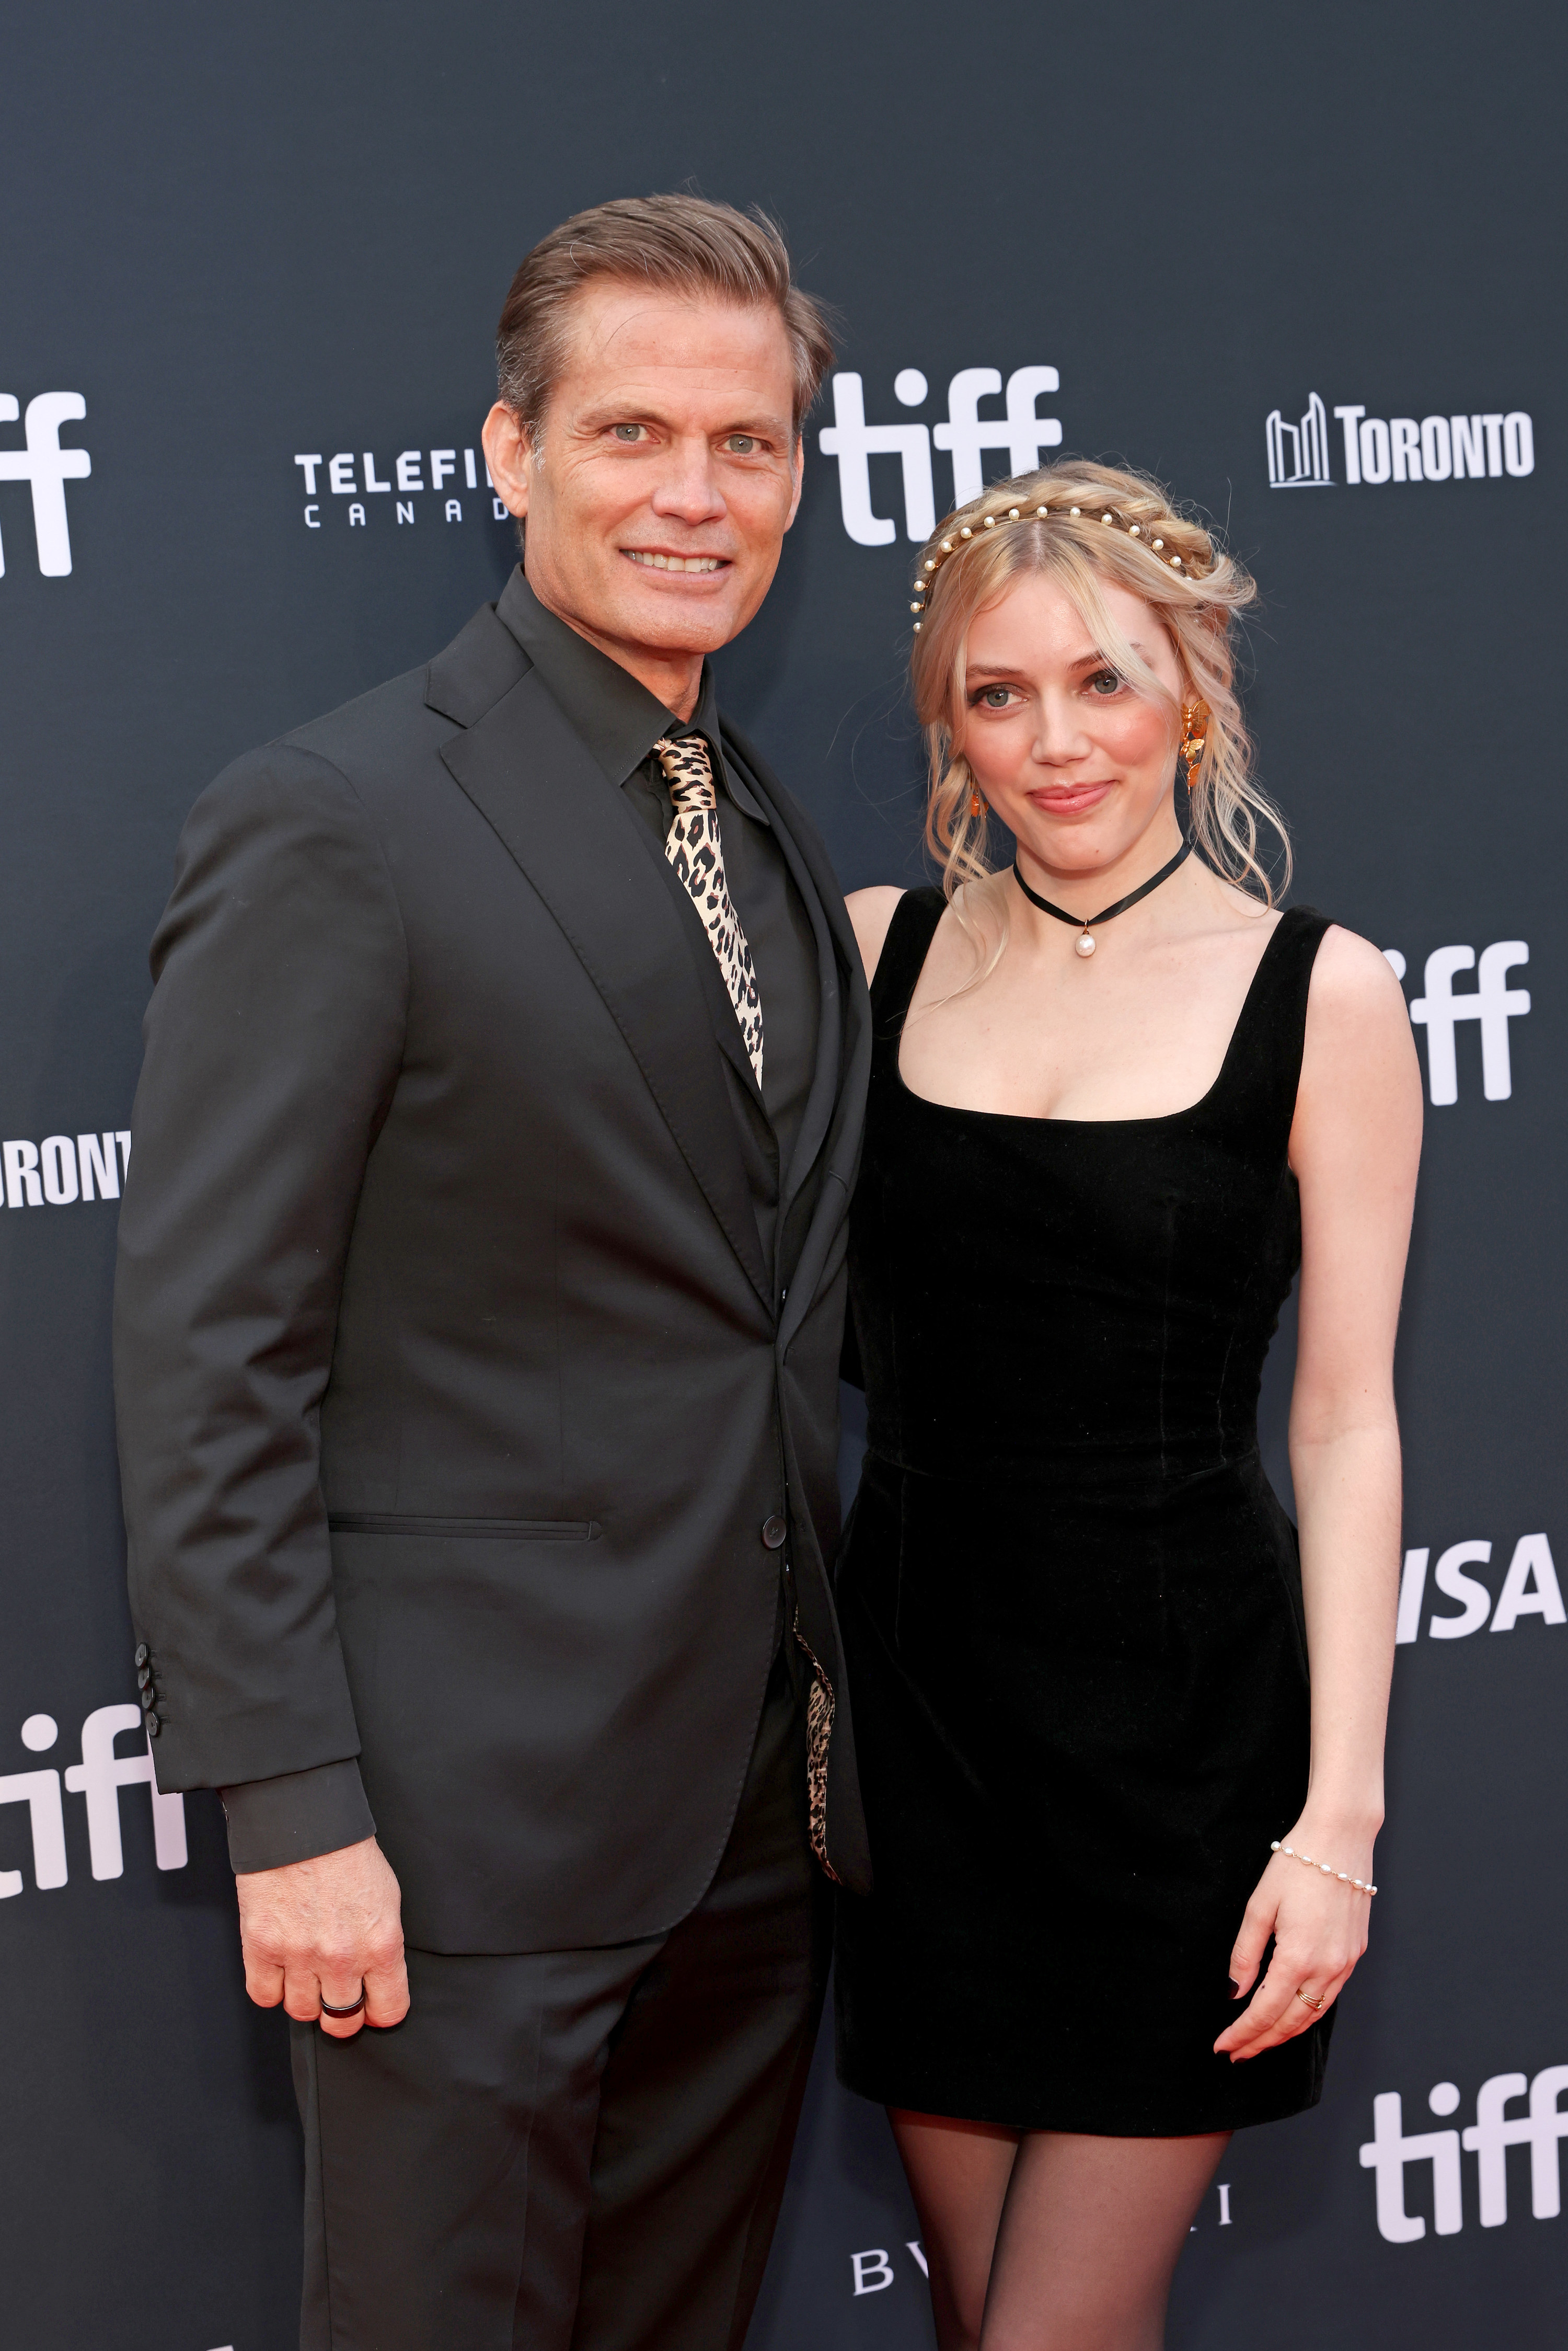 Casper in a suit and Chrissy, in a minidress, on the red carpet